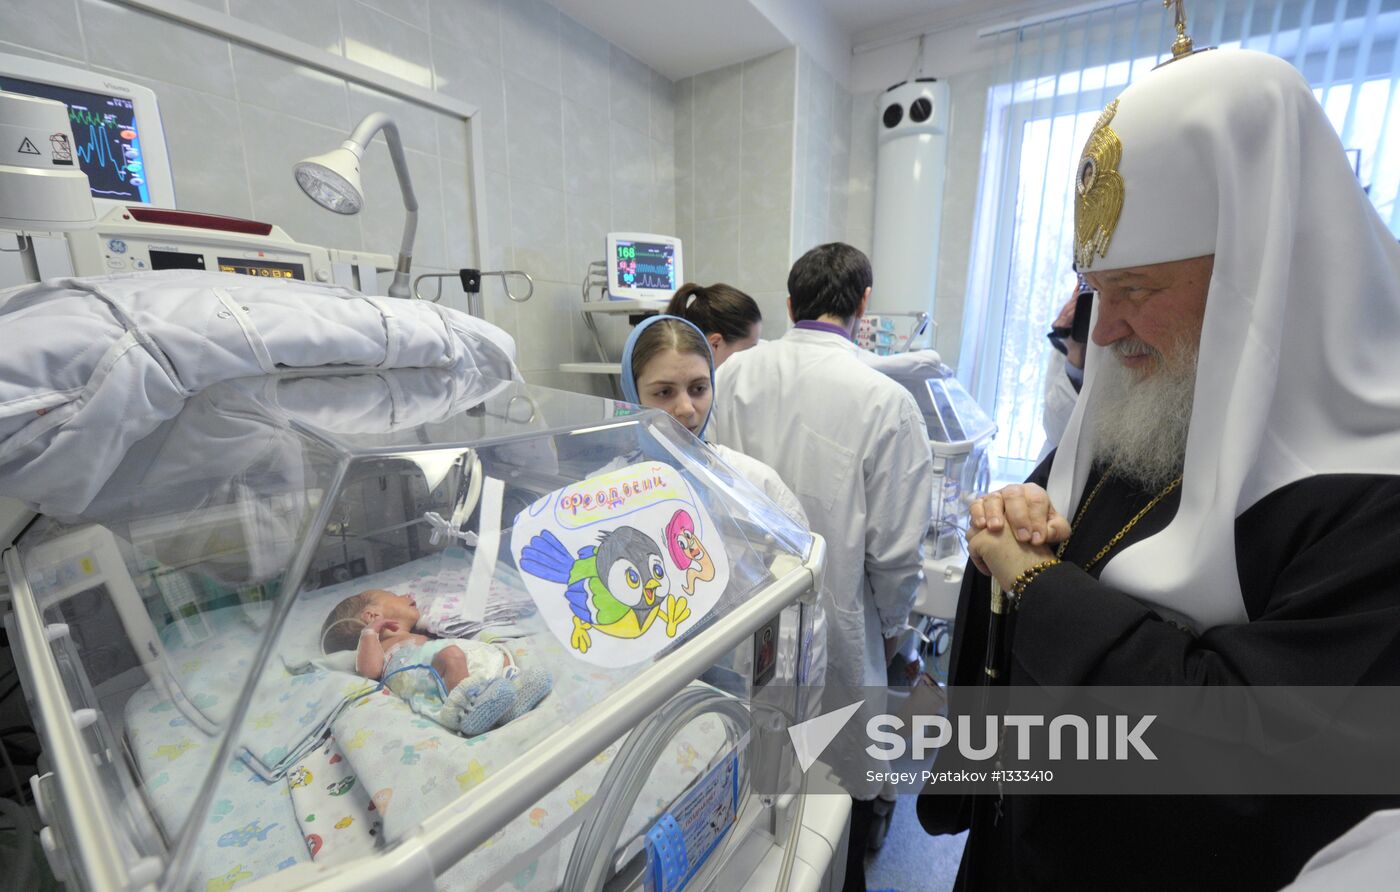 Patriarch Kirill visits maternity hospital in Moscow